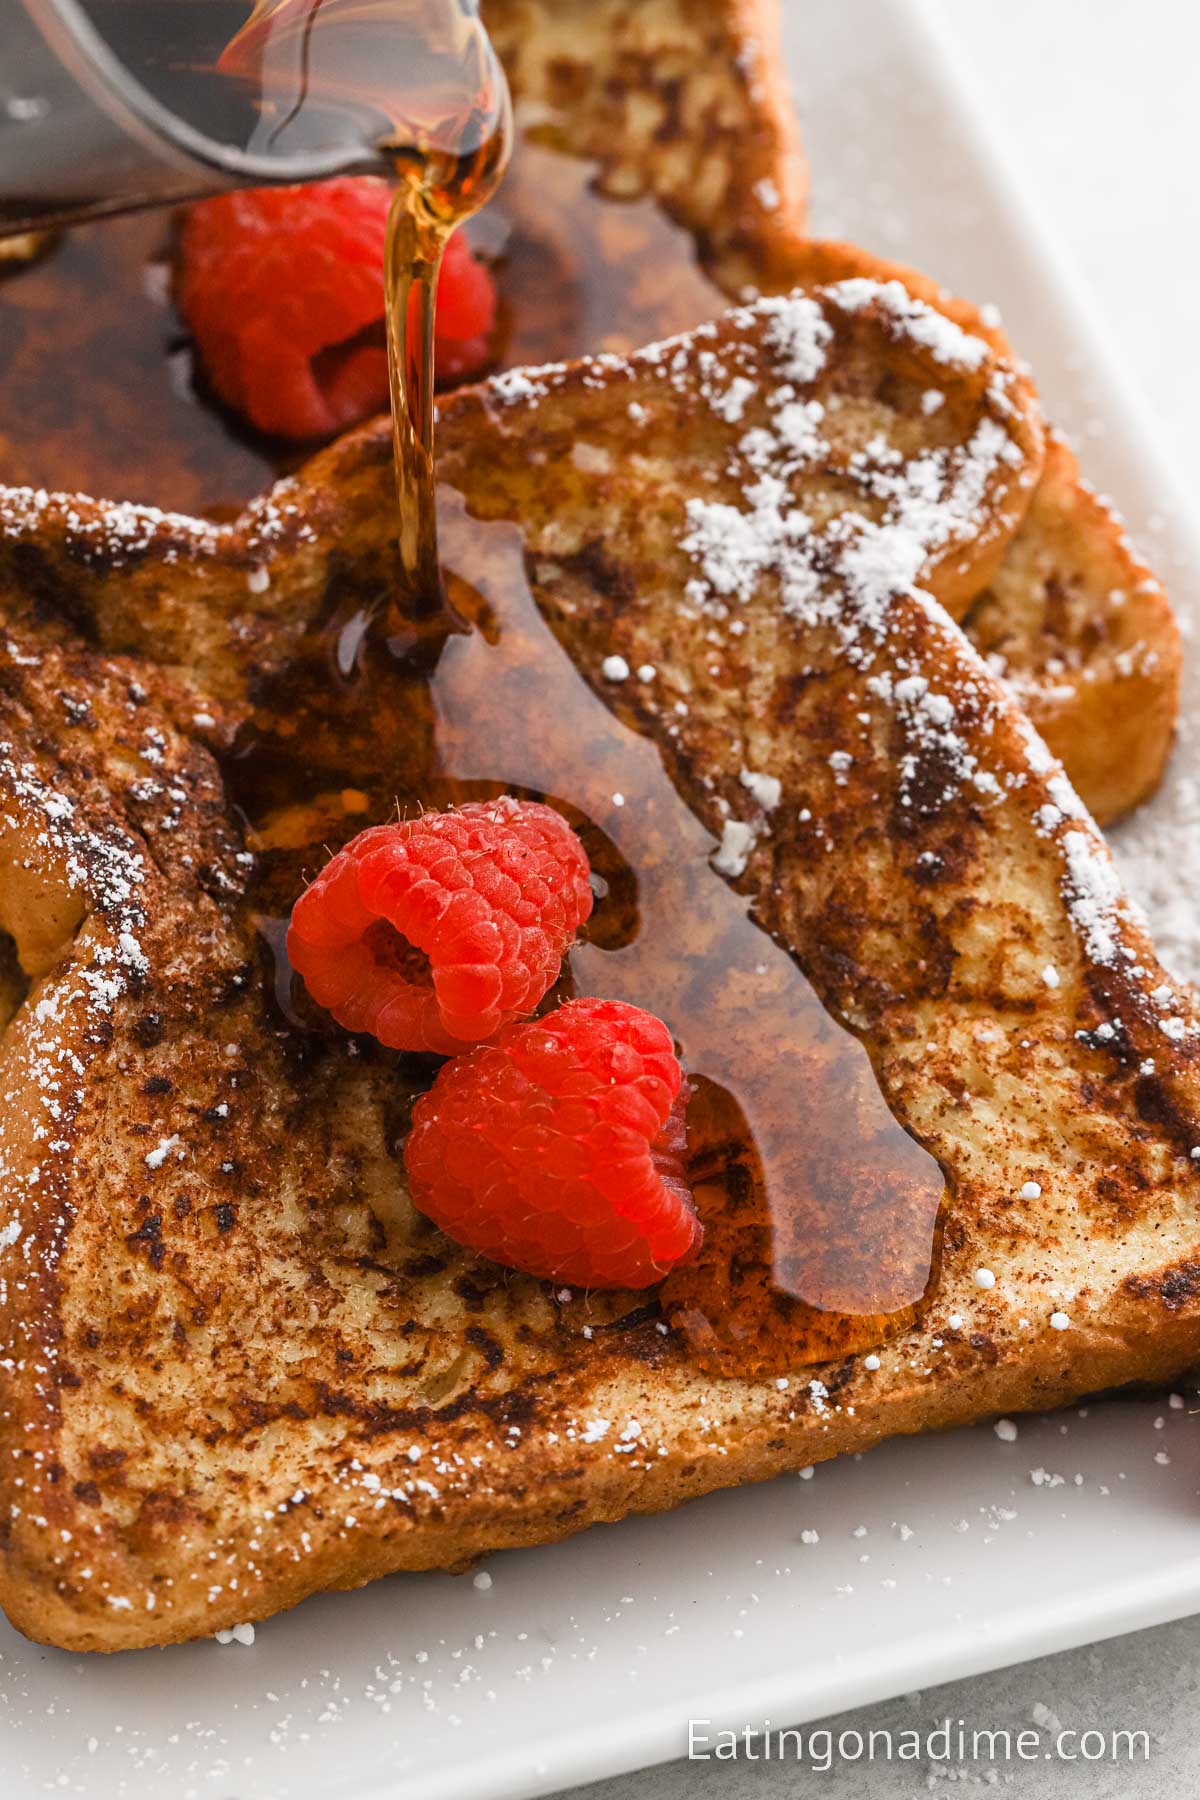 Syrup being poured over cinnamon french toast with fresh berries